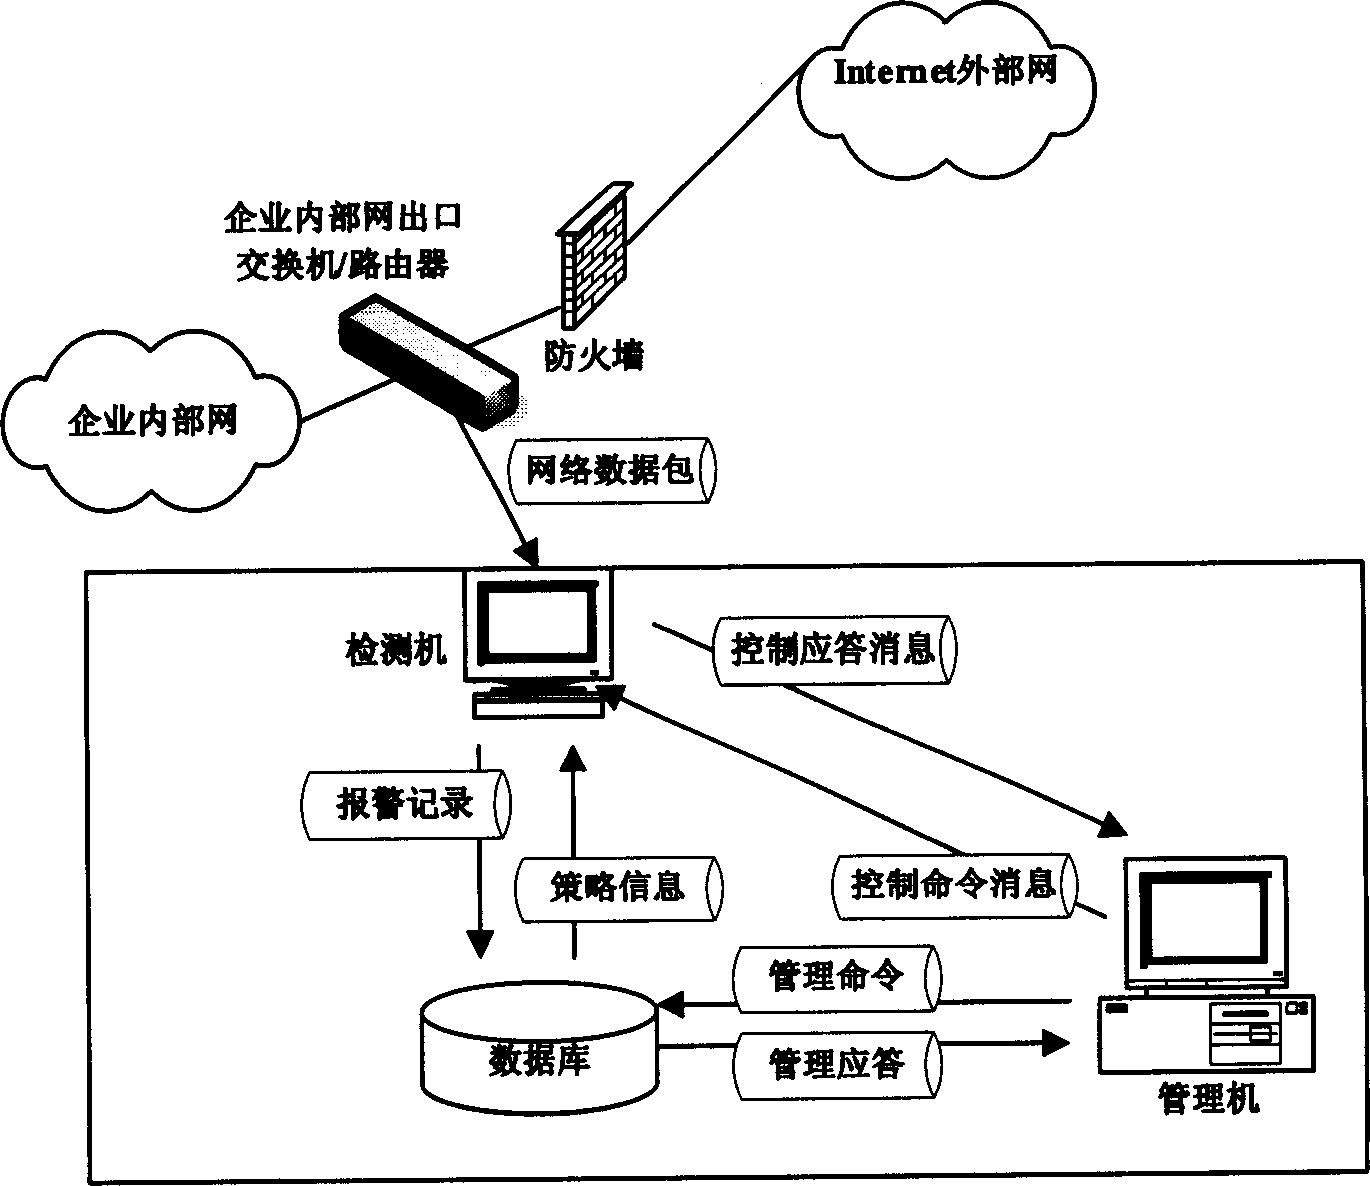 System and method for detecting network worm